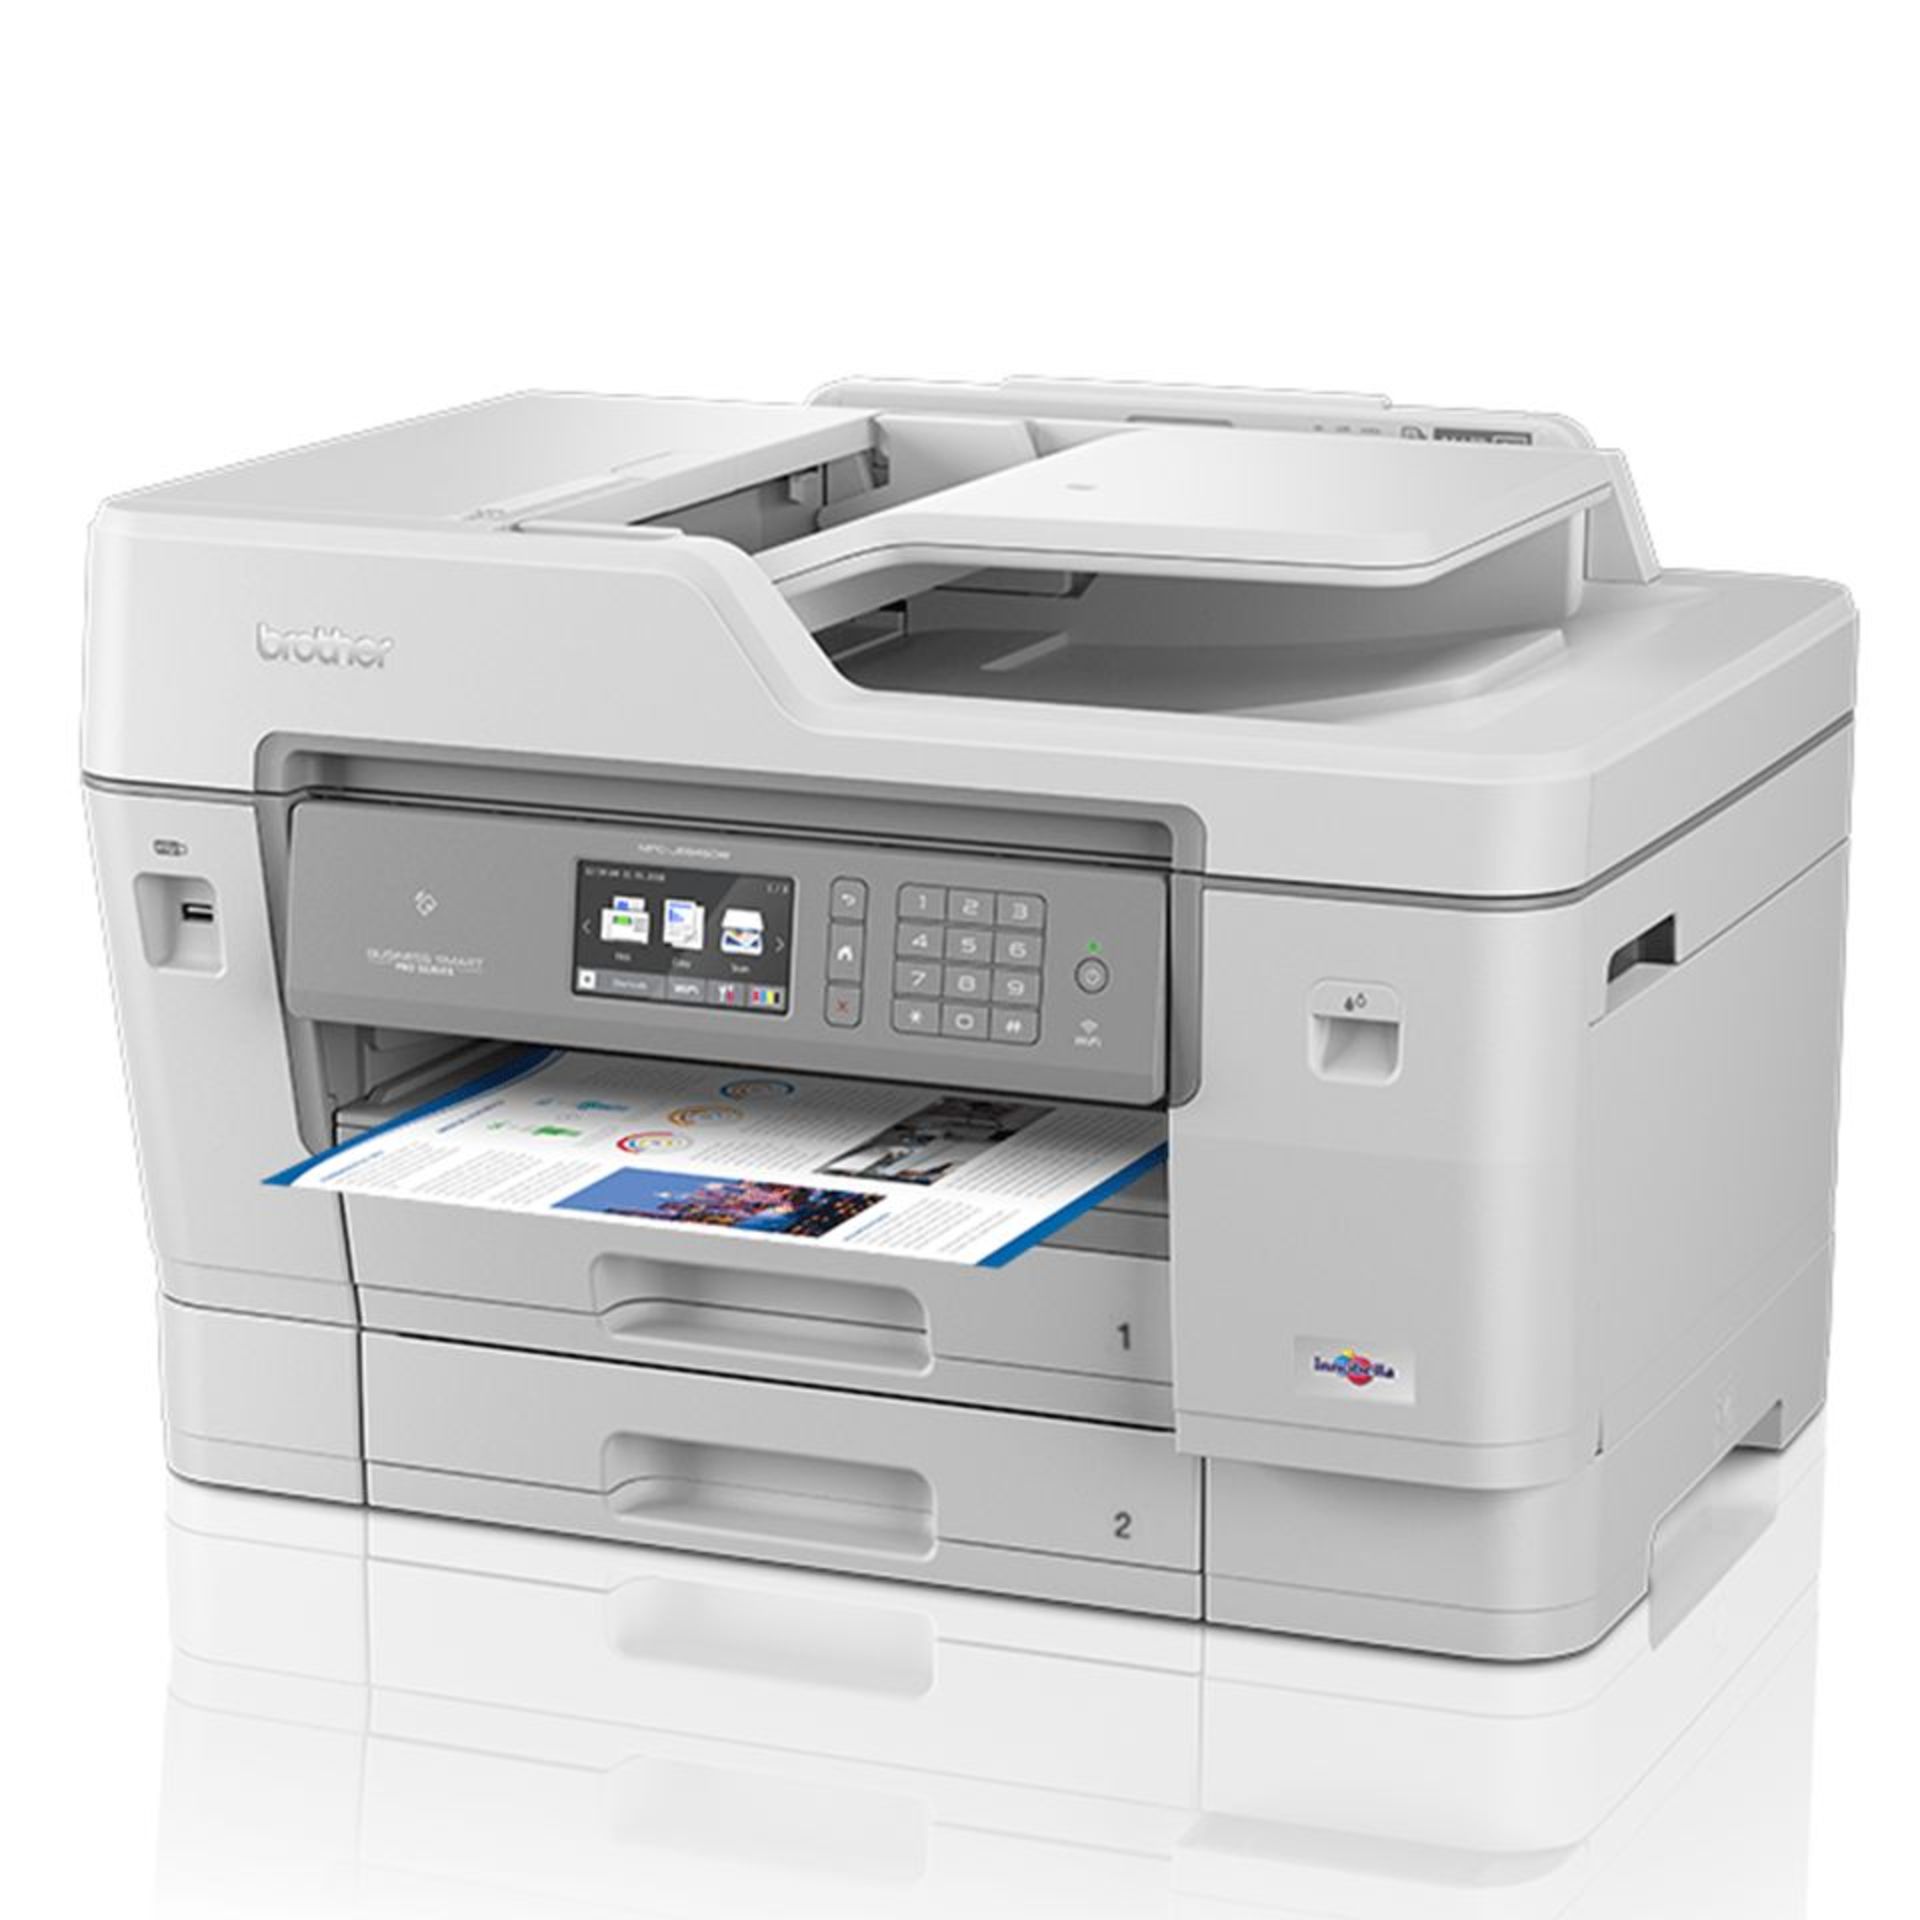 Brother MFC-J6945DW Colour Wireless A3 Inkjet 4-in-1 Printer. - P7. RRP £539.00. The MFC-J6945DW